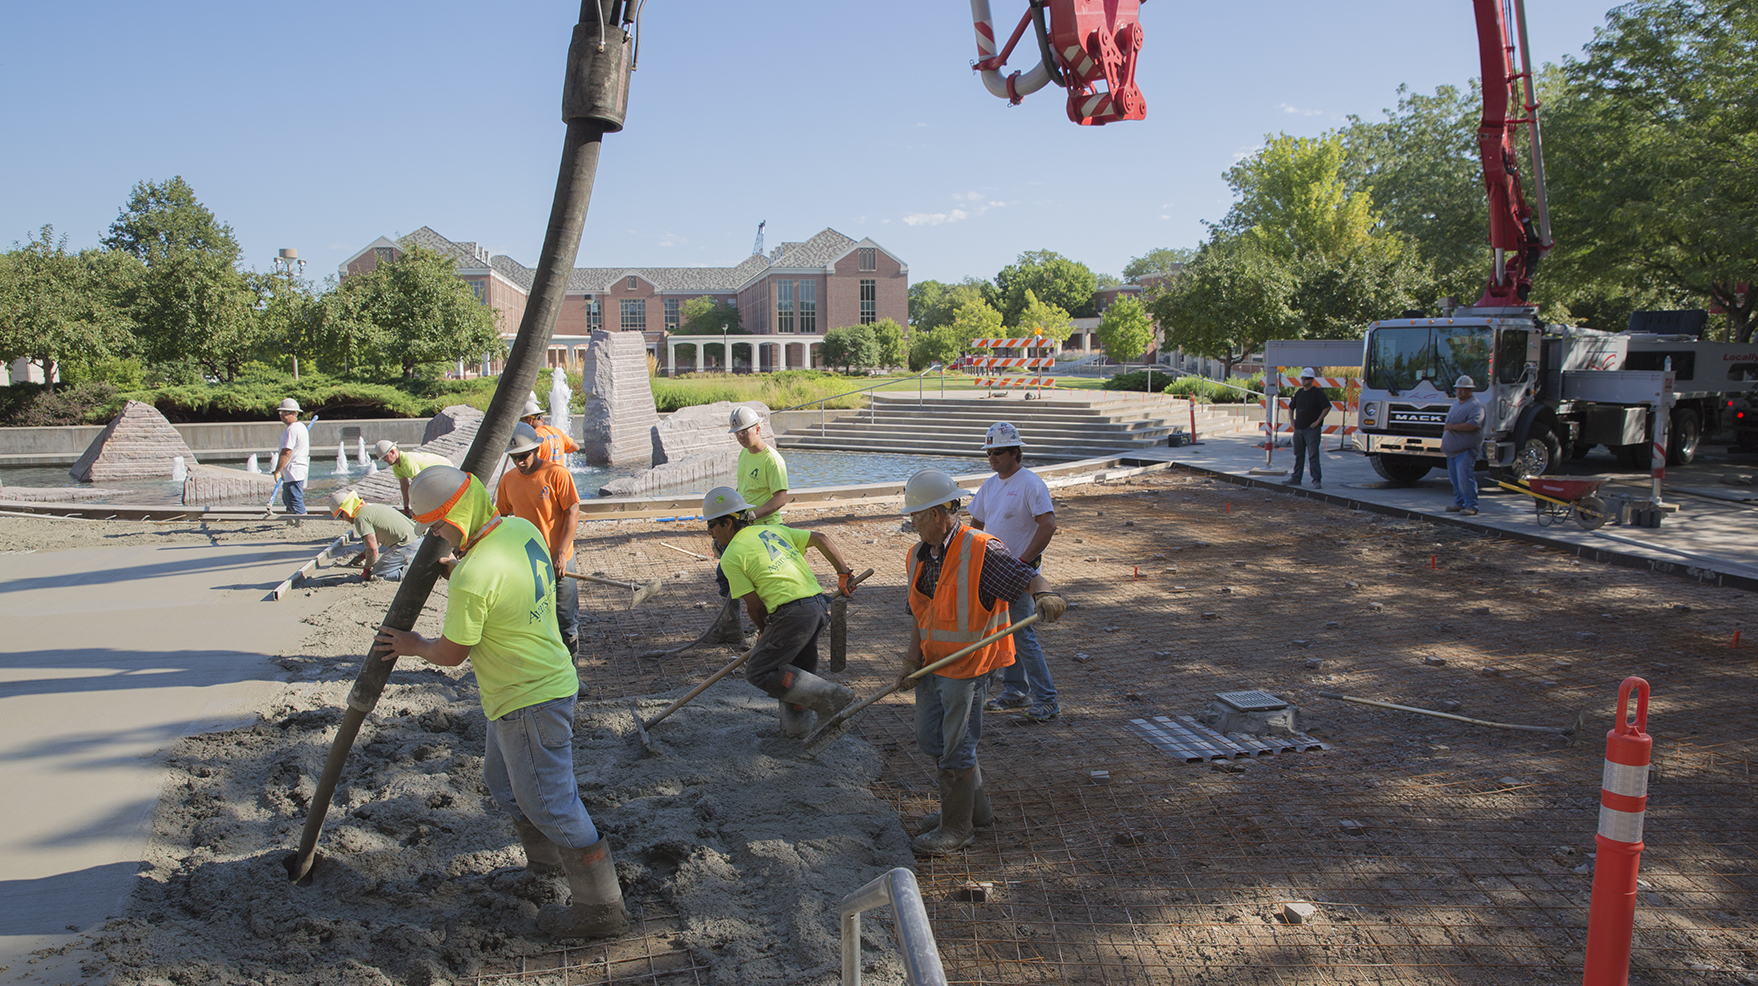 Concrete replacement projects race toward completion | Nebraska Today